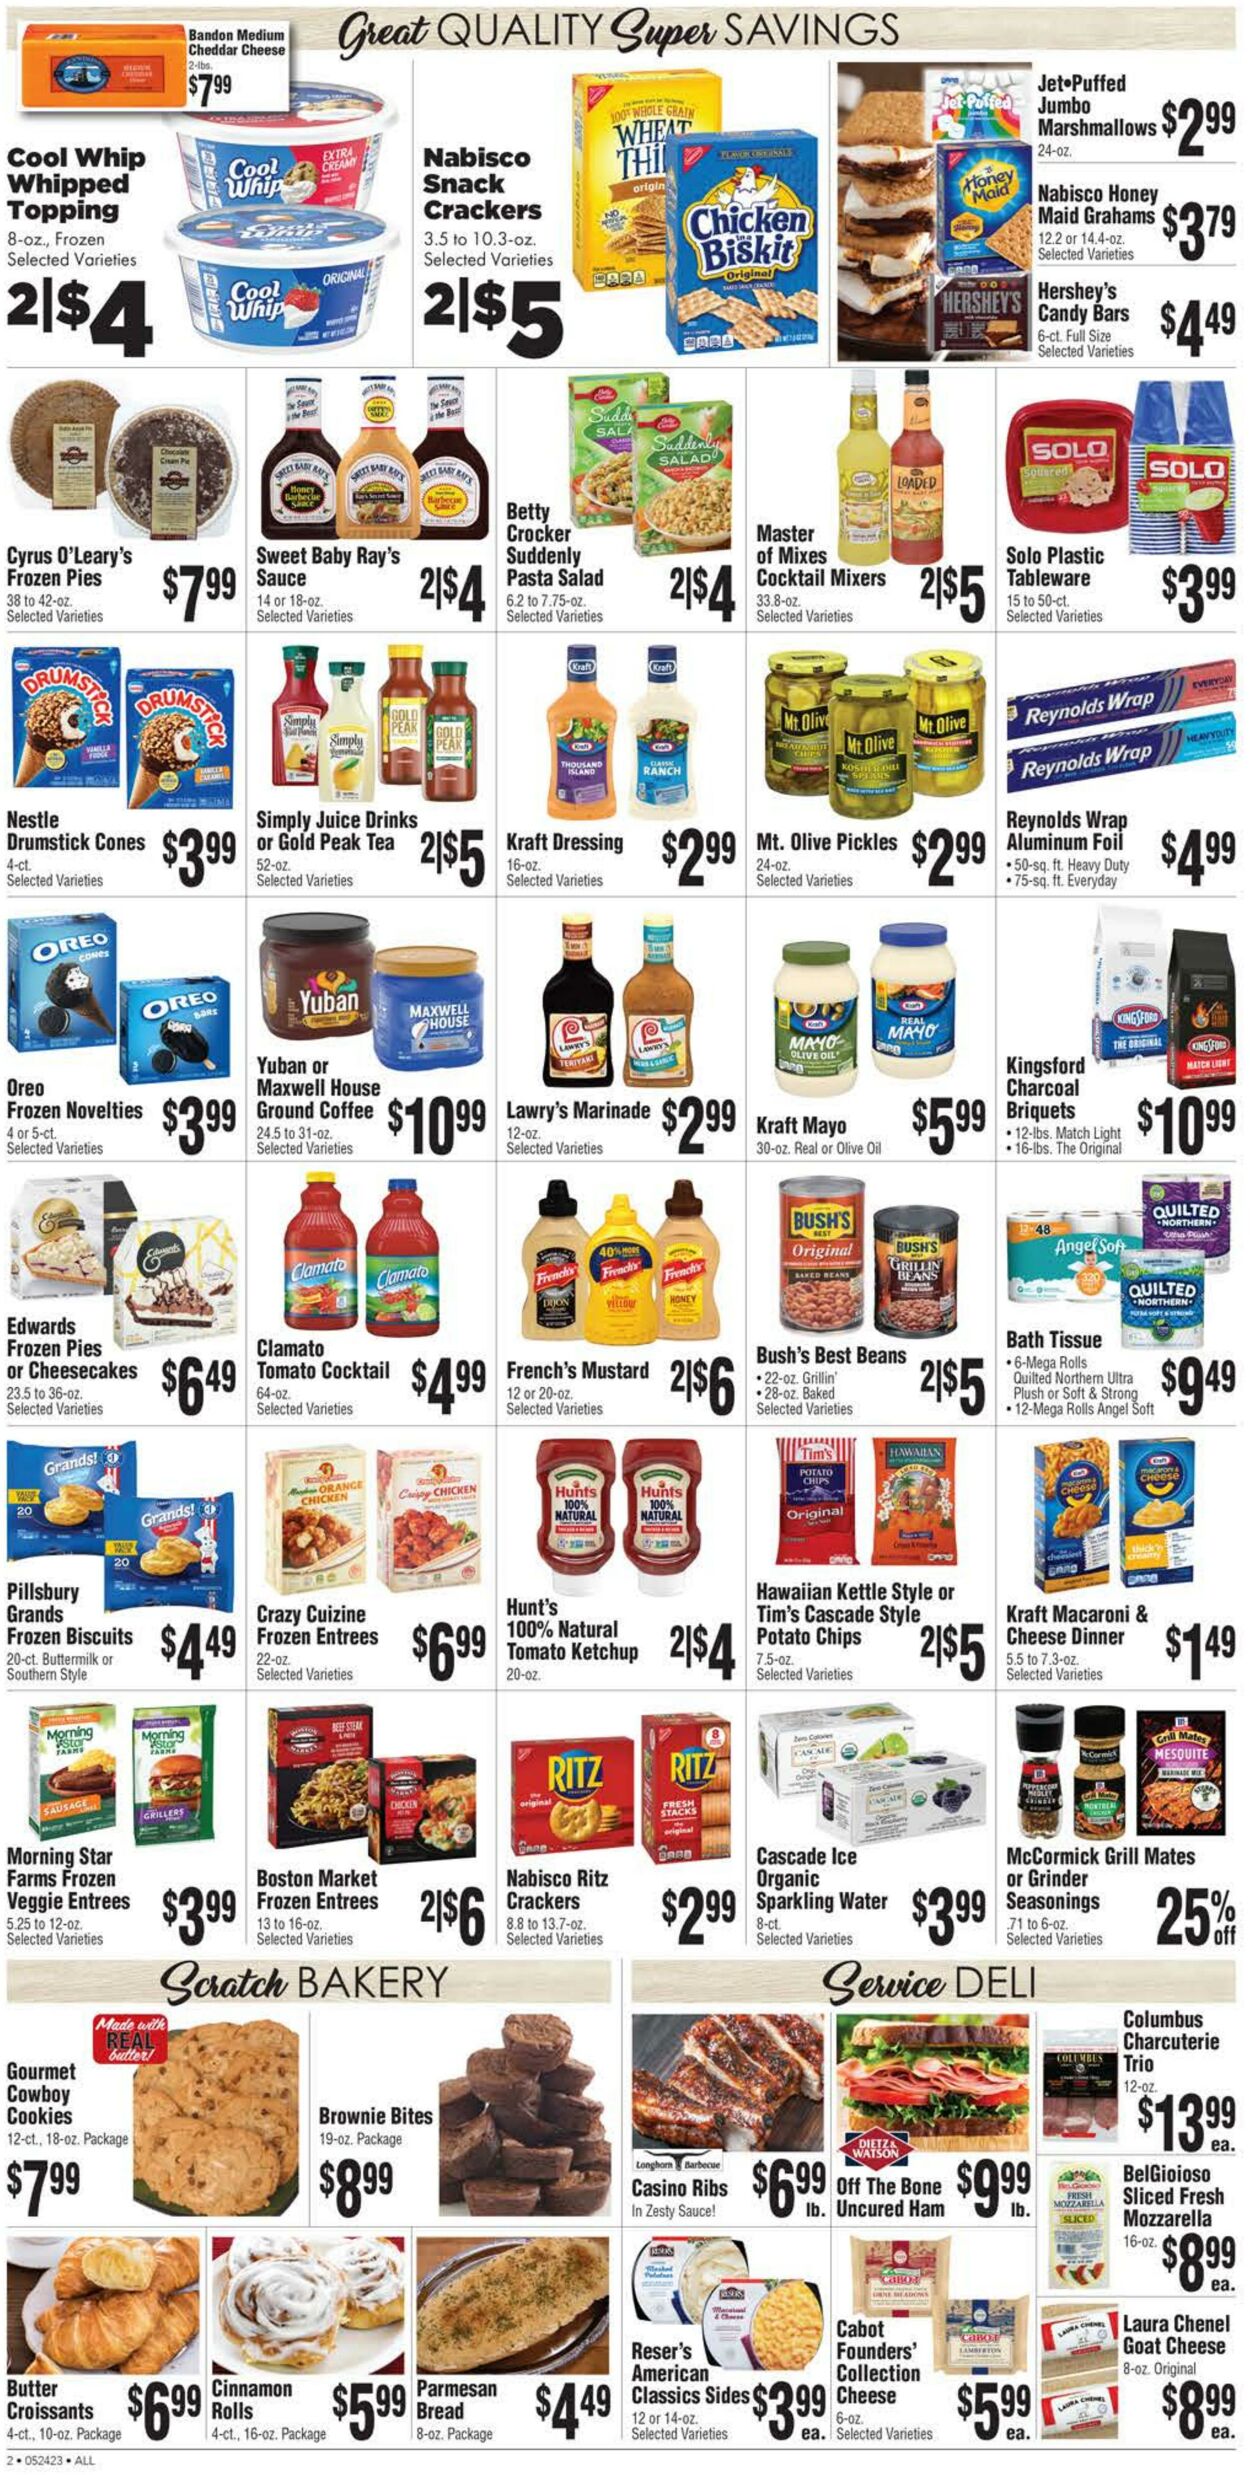 Weekly ad Rosauers 05/24/2023 - 05/30/2023